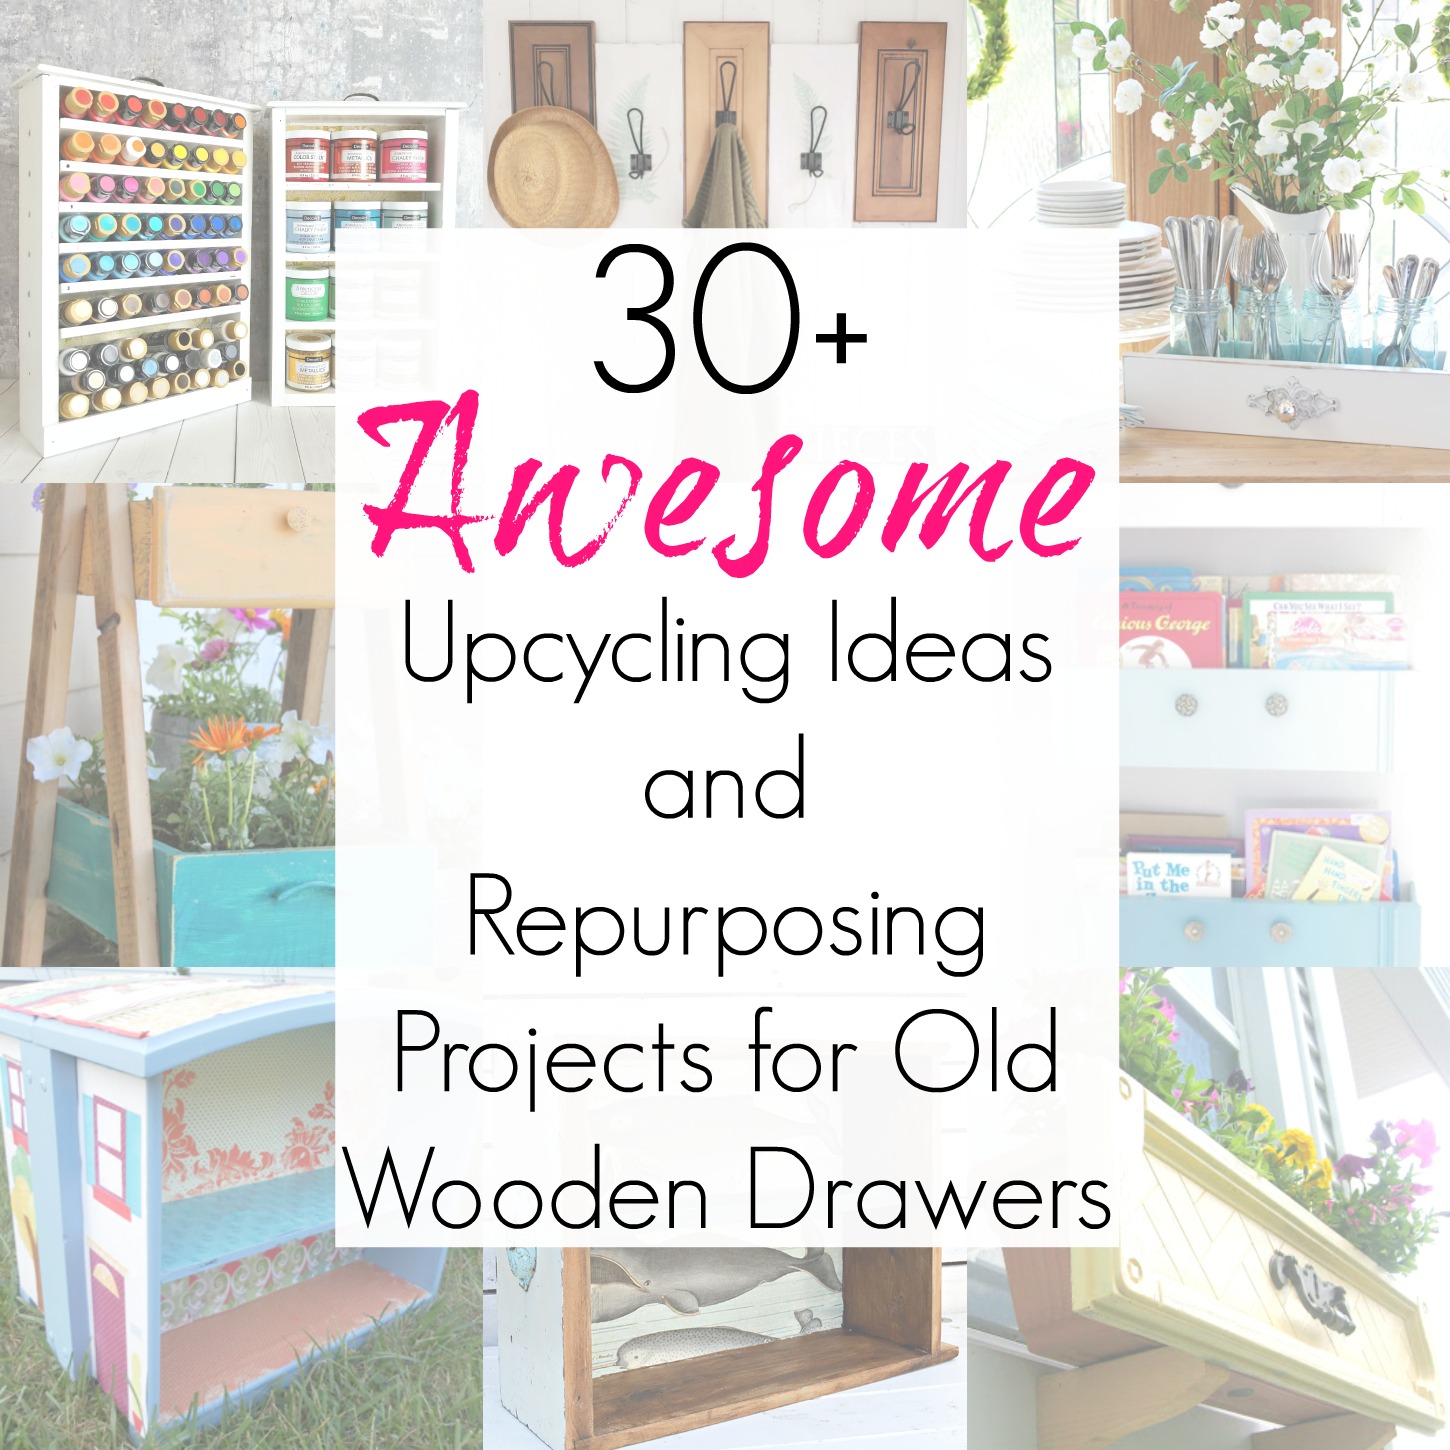 Upcycling Ideas And Repurposed Projects For Wooden Drawers